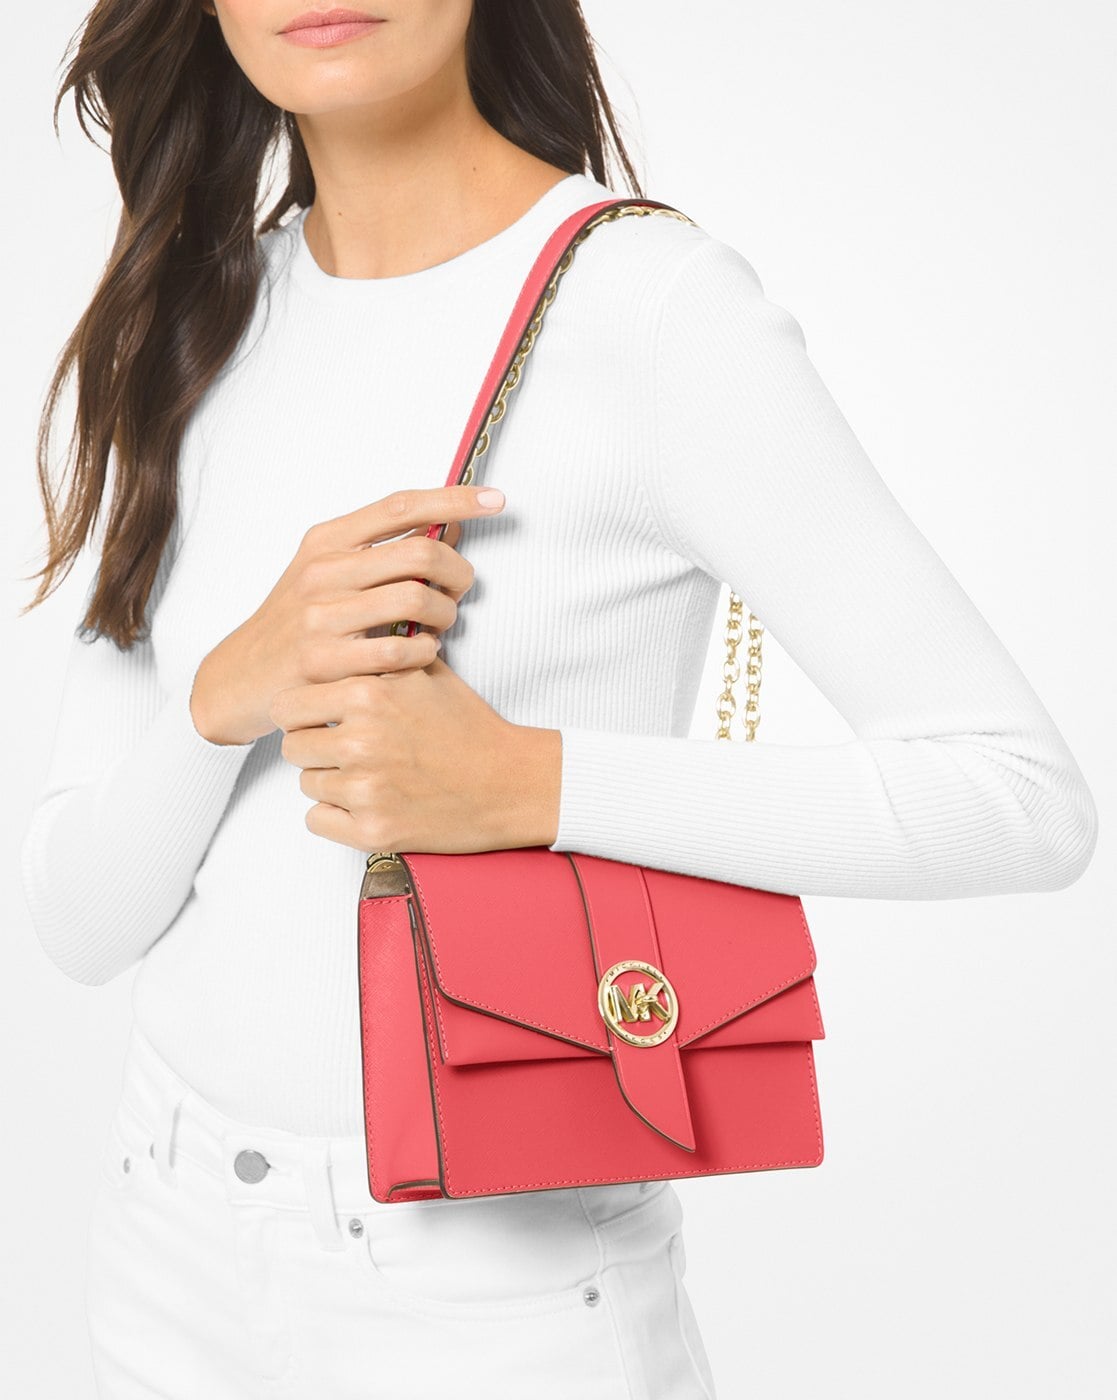 MICHAEL KORS: Greenwich Michael bag in saffiano leather - Gnawed